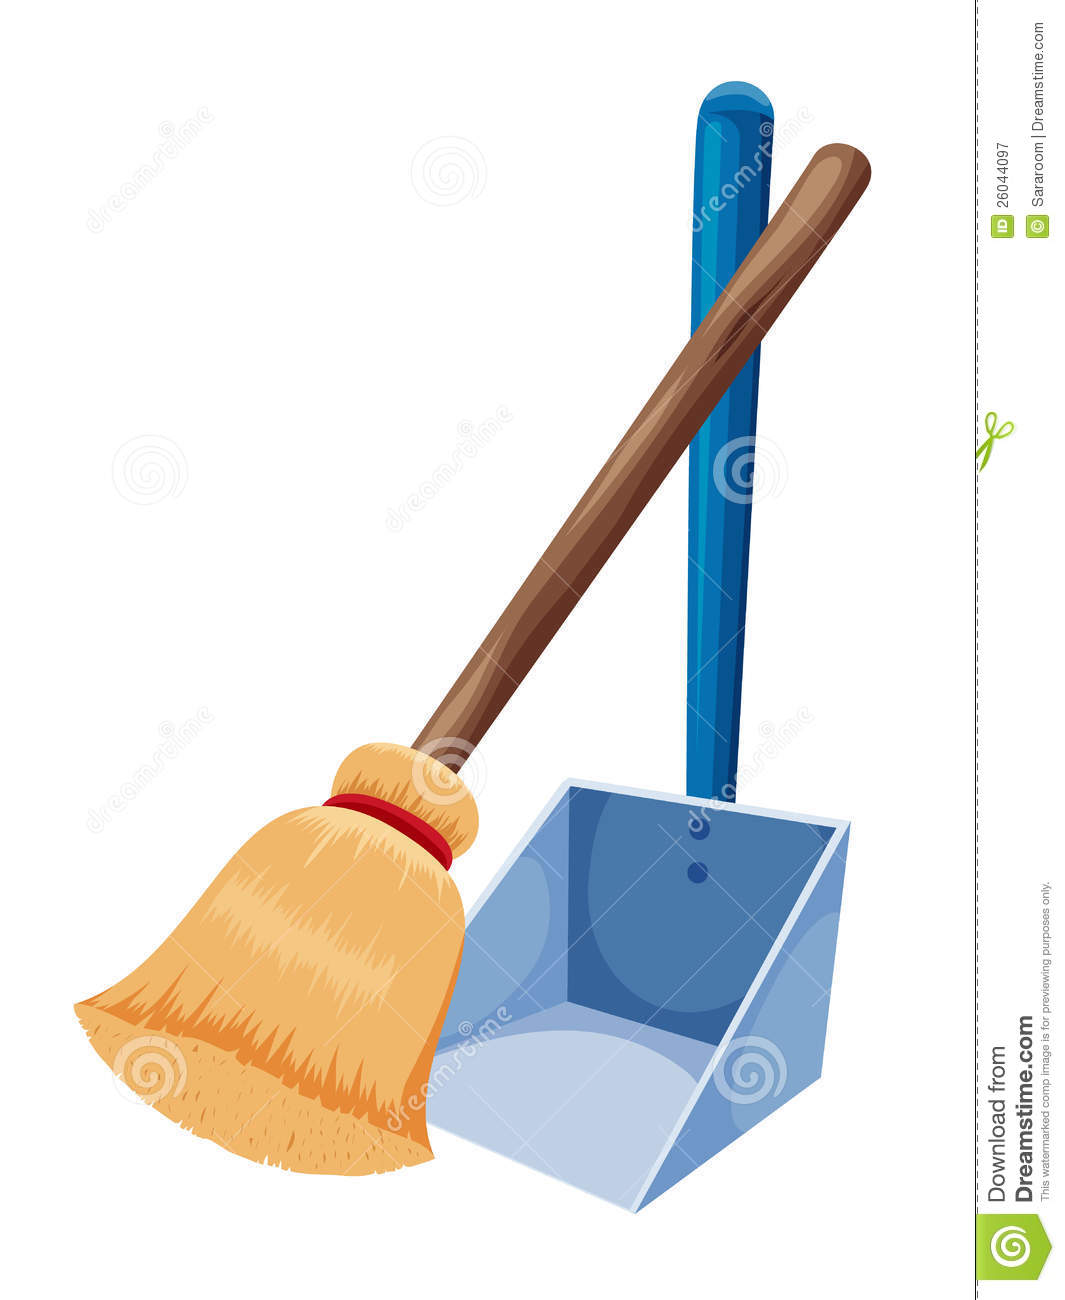 And dust pan . Broom clipart dusting